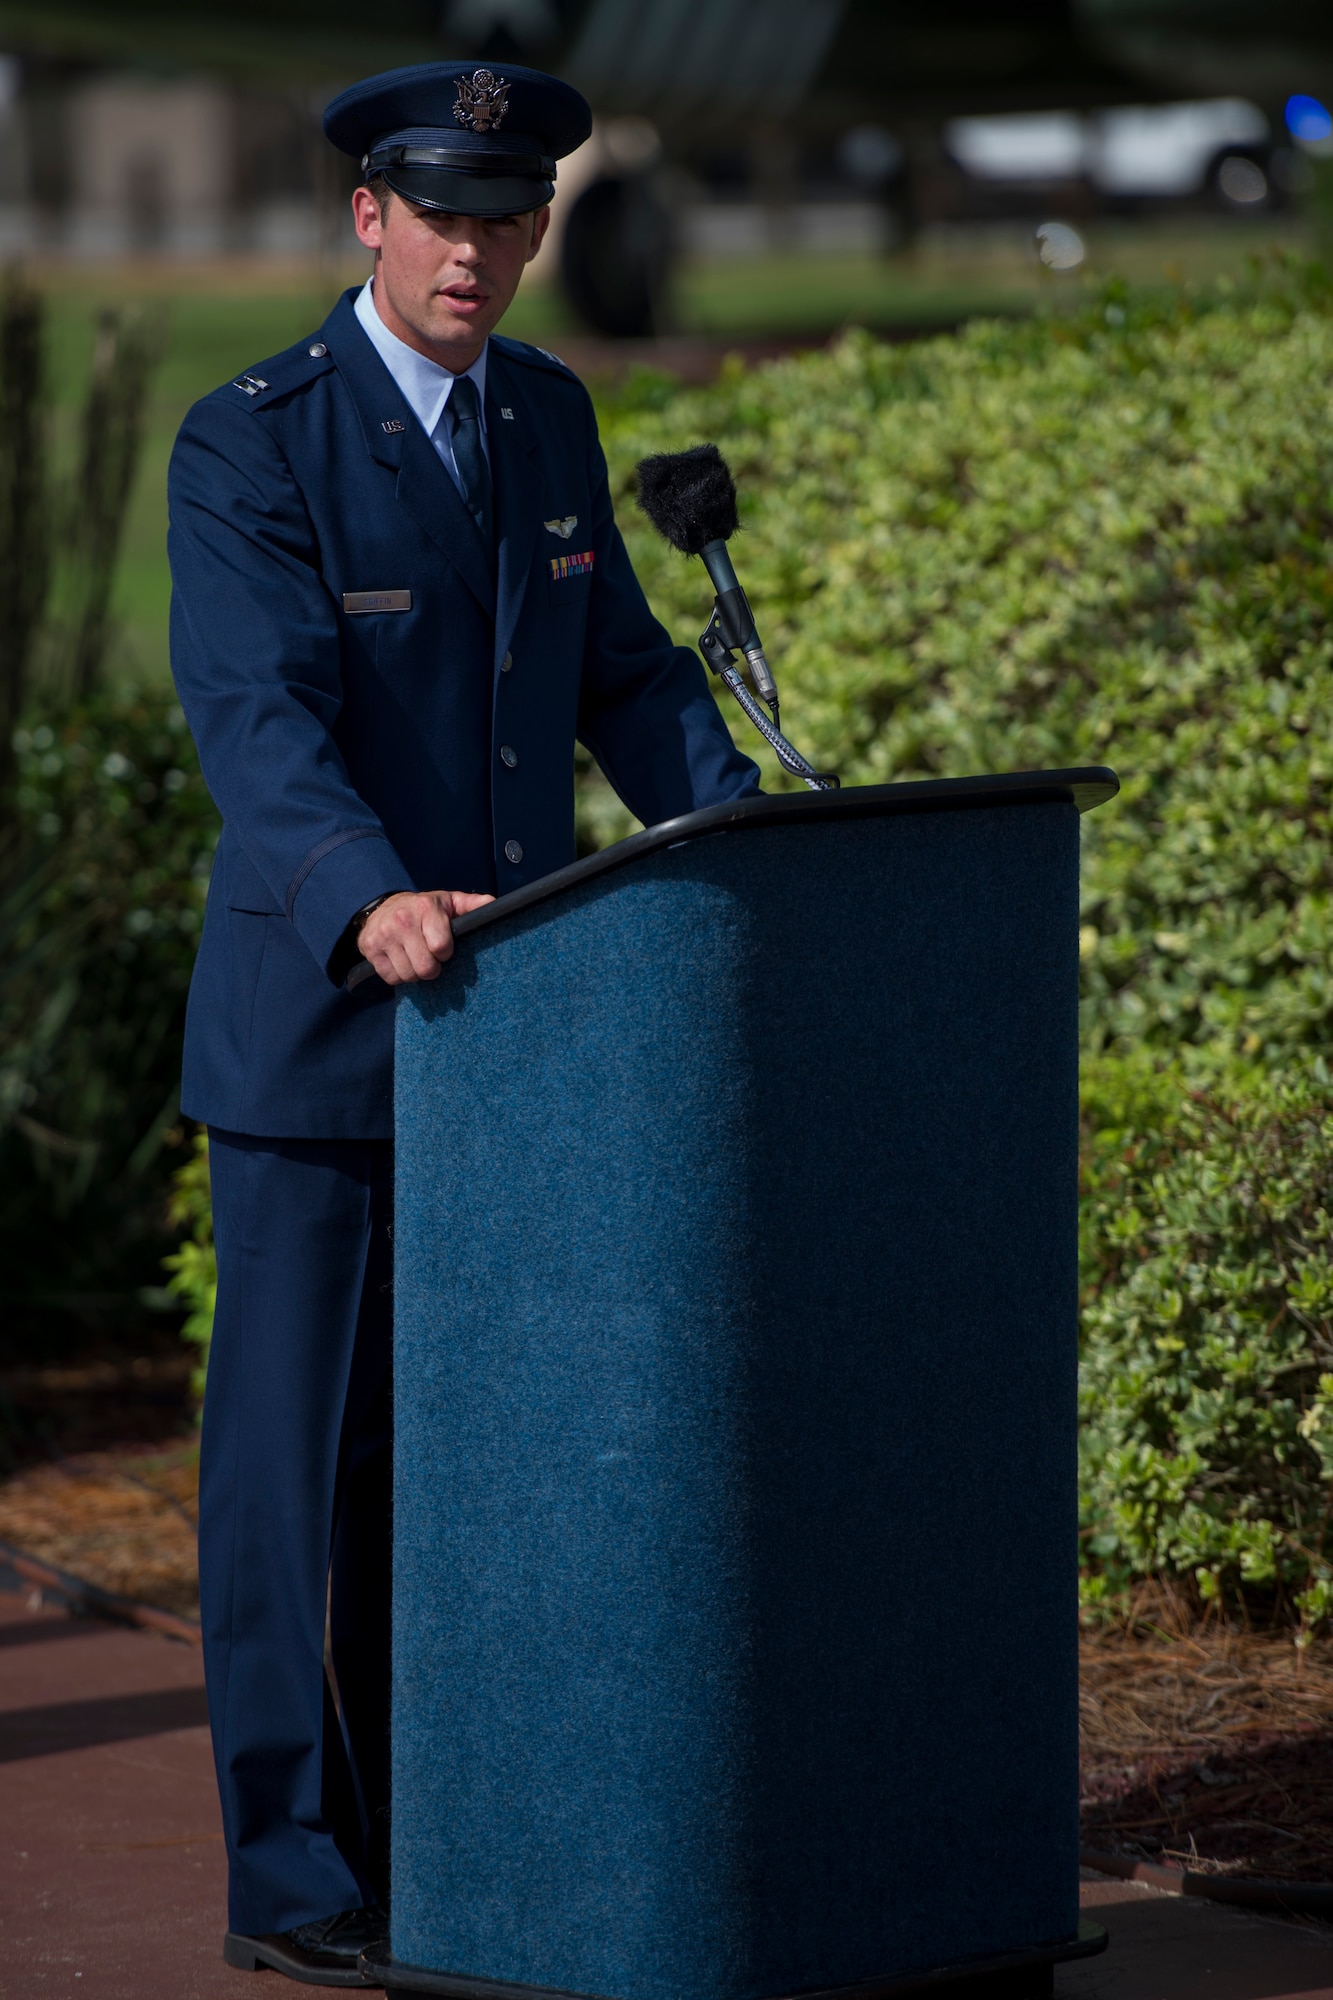 Capt. Mark Griffin, a pilot with the 8th Special Operations Squadron, narrates the Operation Eagle Claw memorial ceremony at Hulburt Field, Fla., June 23, 2017. Operation Eagle Claw was an attempted hostage-rescue mission in 1980 that resulted in five, 8th Special Operations Squadron Airmen and three Marines sacrificing their lives when two of the involved aircraft collided at the Desert One staging site. (U.S. Air Force photo by Staff Sgt. Victor J. Caputo)